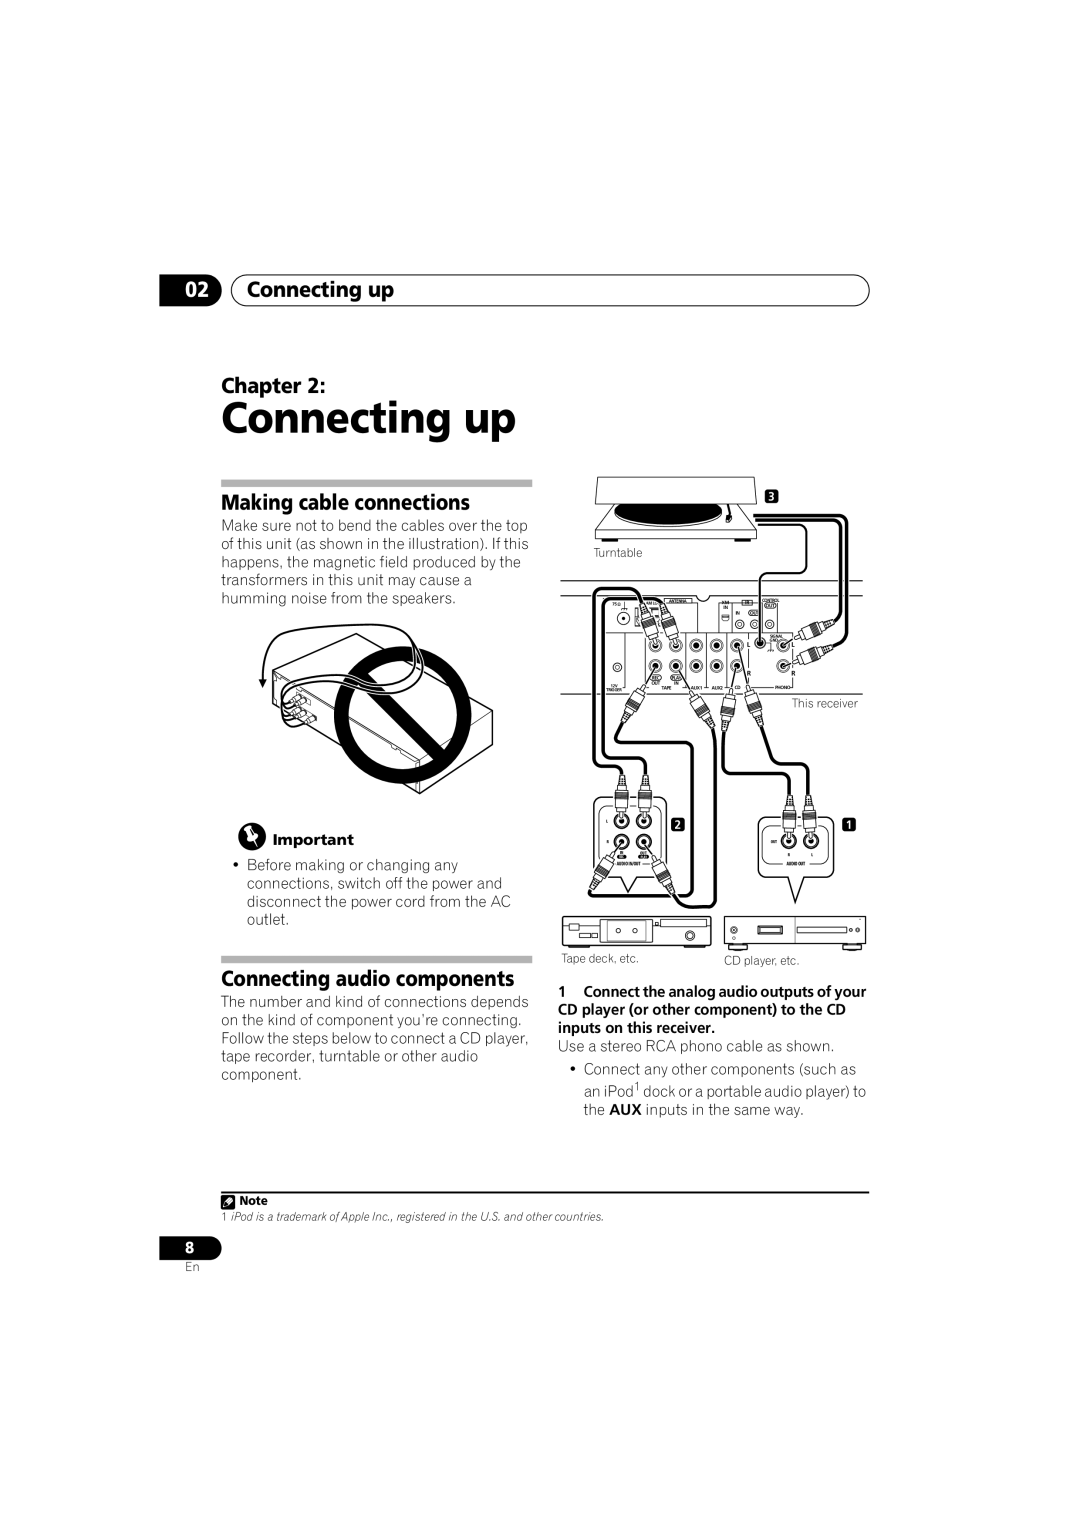 Pioneer SX-A6MK2-K 02Connecting up Chapter, Making cable connections, Connecting audio components 